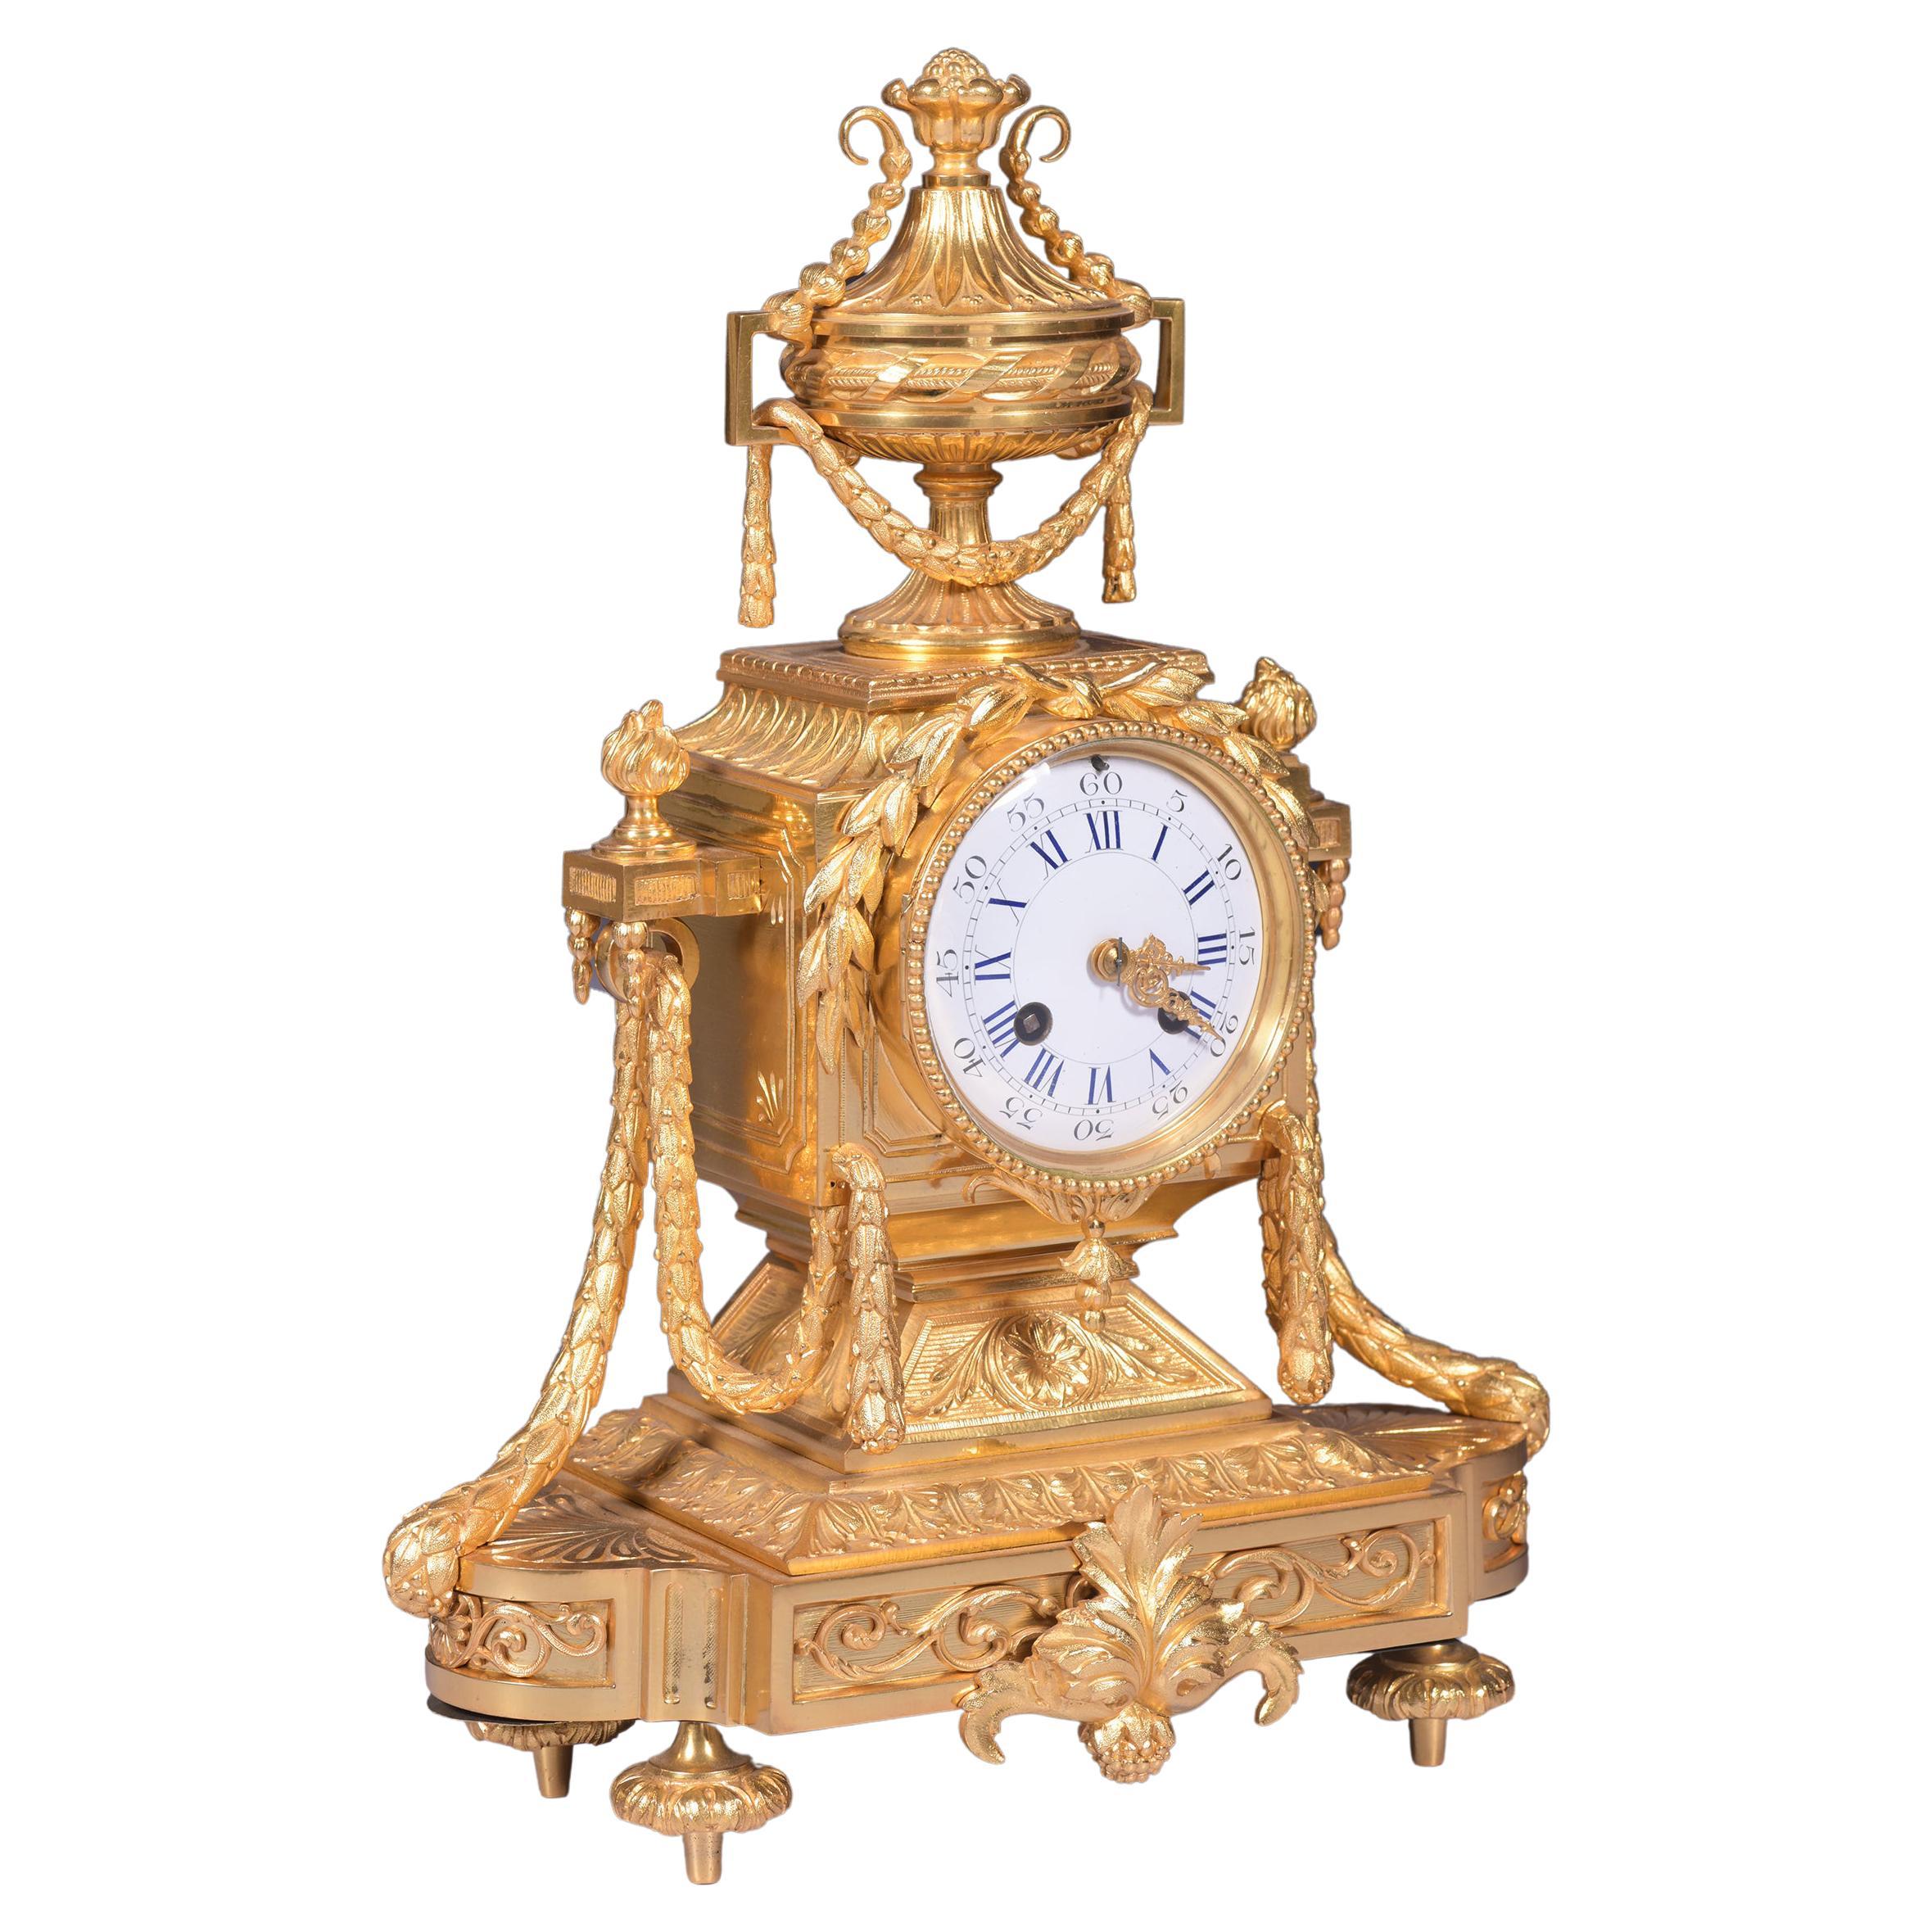 19th Century French Ormolu Neoclassical Style Mantle Clock